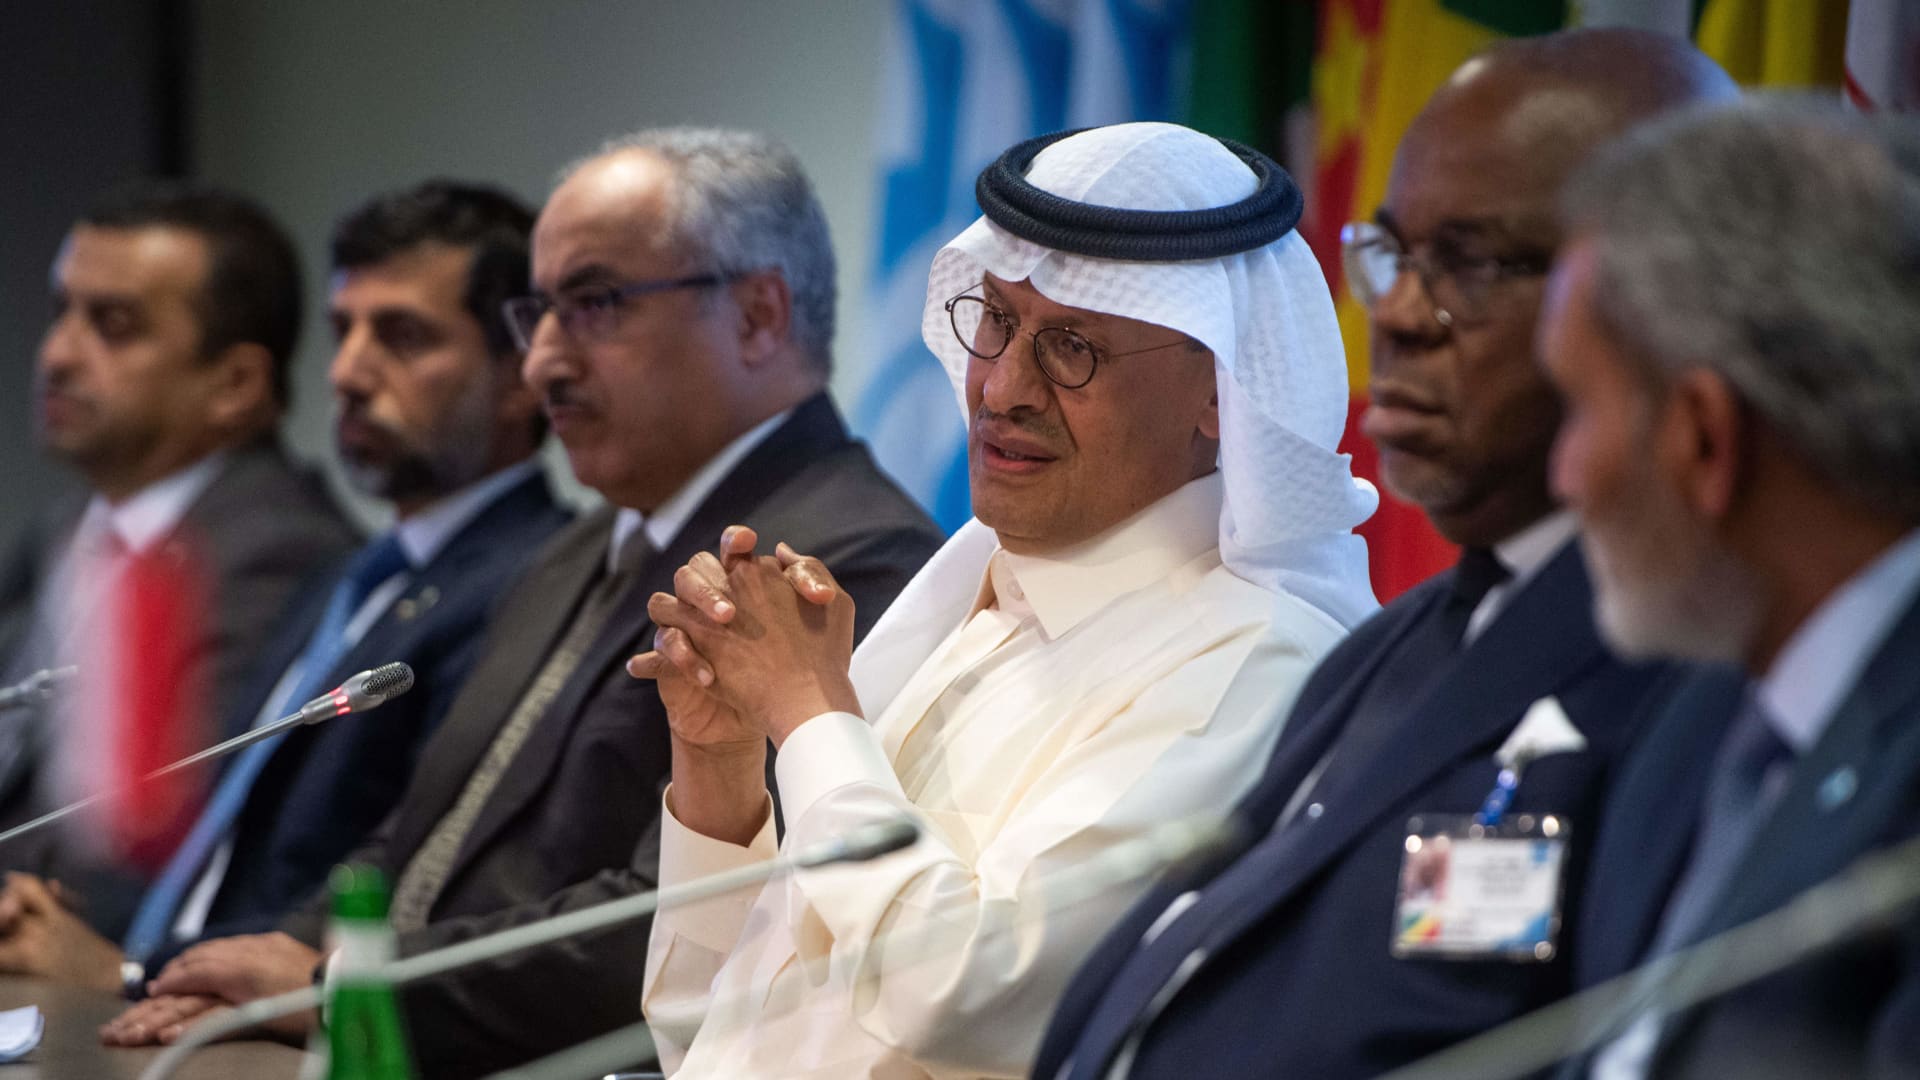 OPEC+ agrees to stick to its existing policy of reducing oil production ahead of Russia sanctions – CNBC